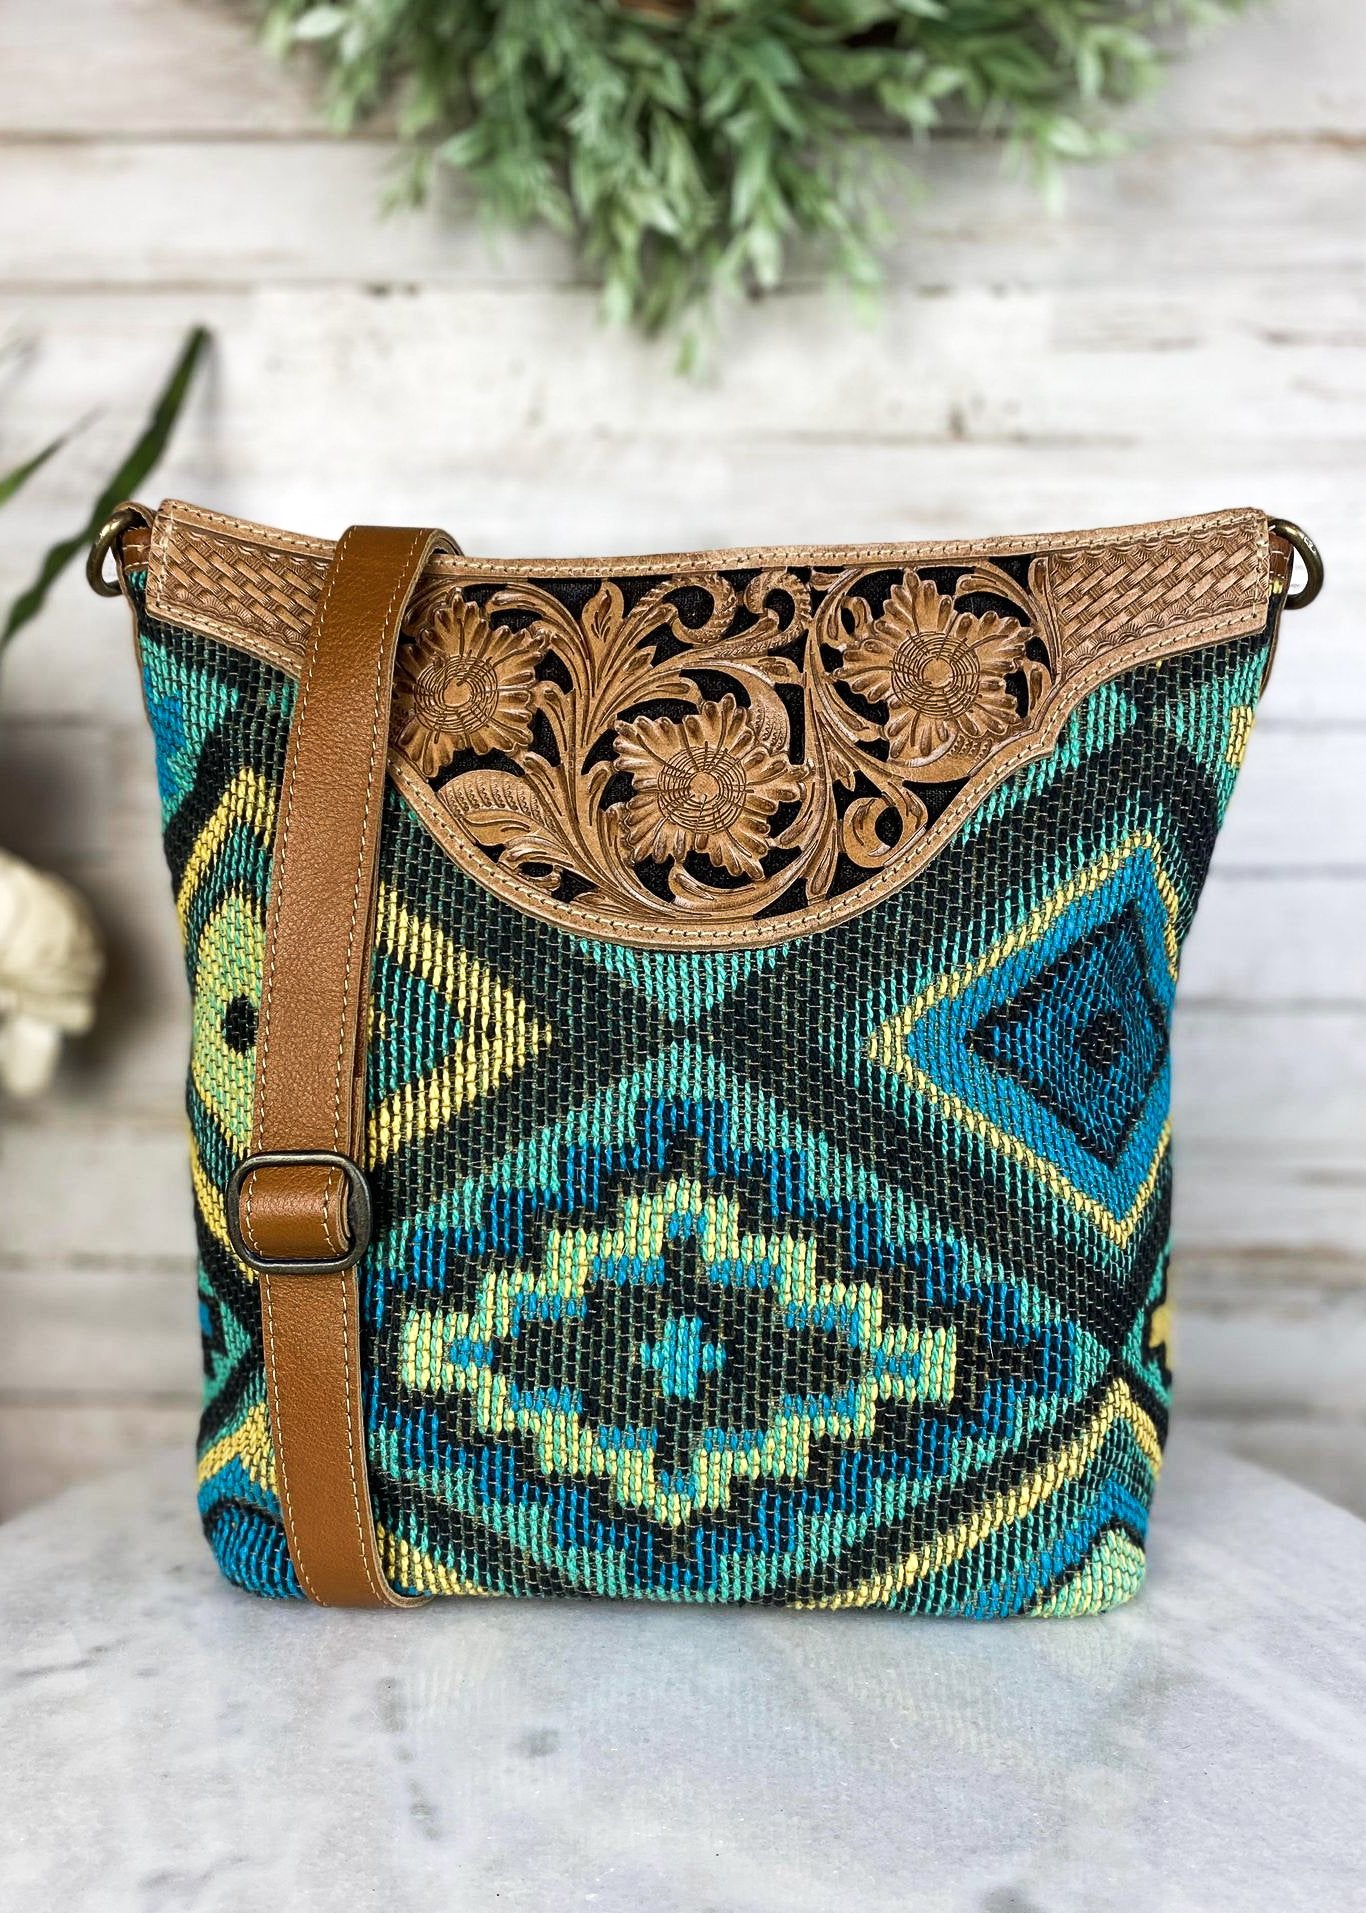 Western Recycled Canvas and Leather Tote Beautiful Tribal Print Tooled Leather